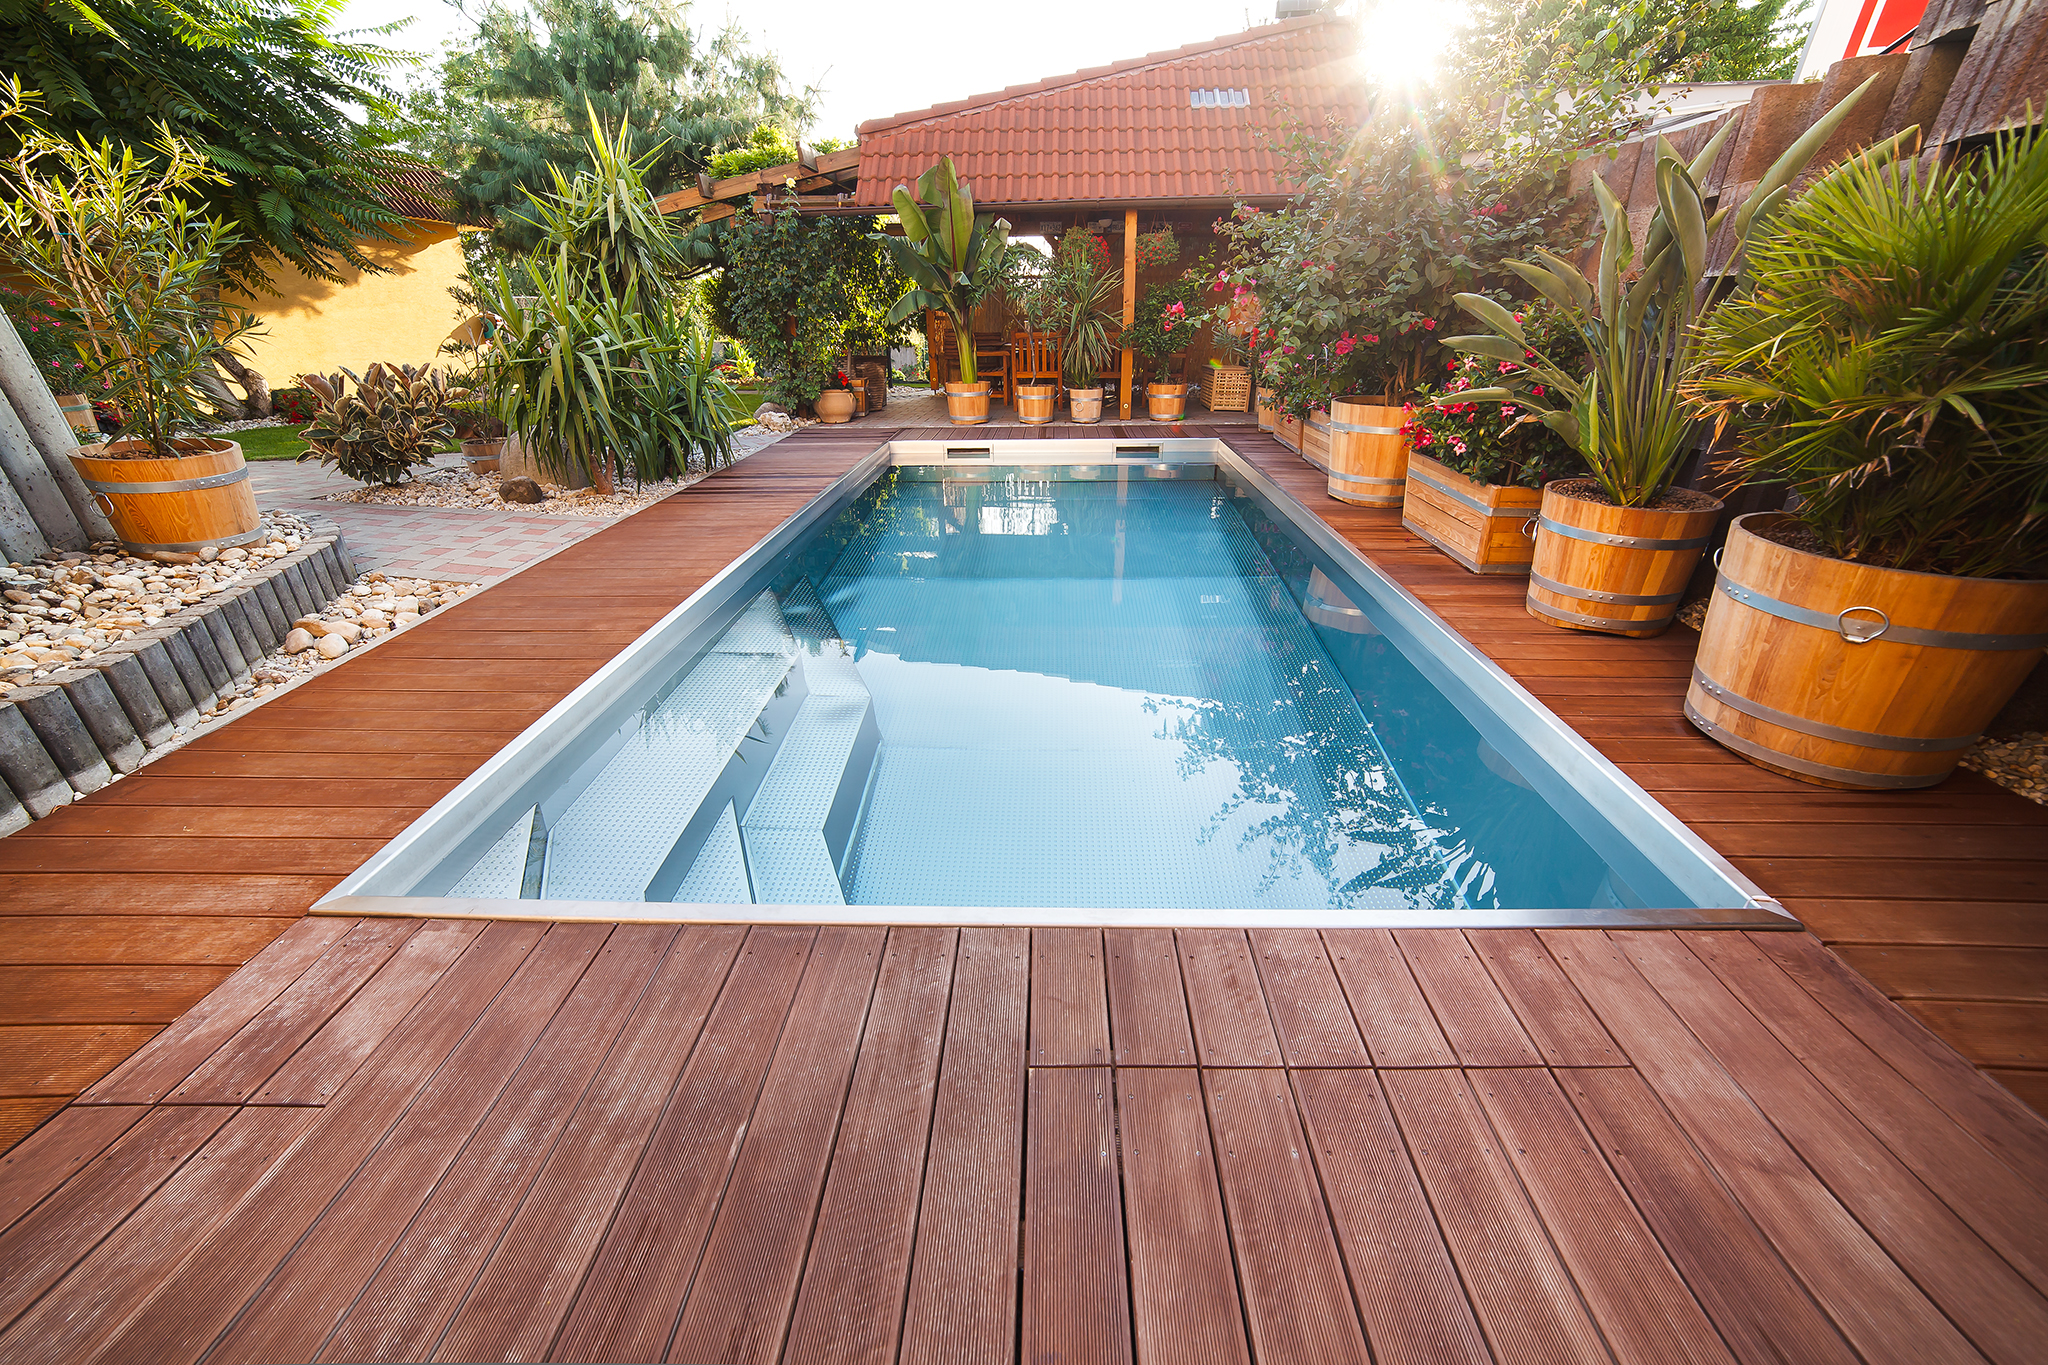 Renovation: Replacement of a Plastic Pool with a Stainless-Steel One